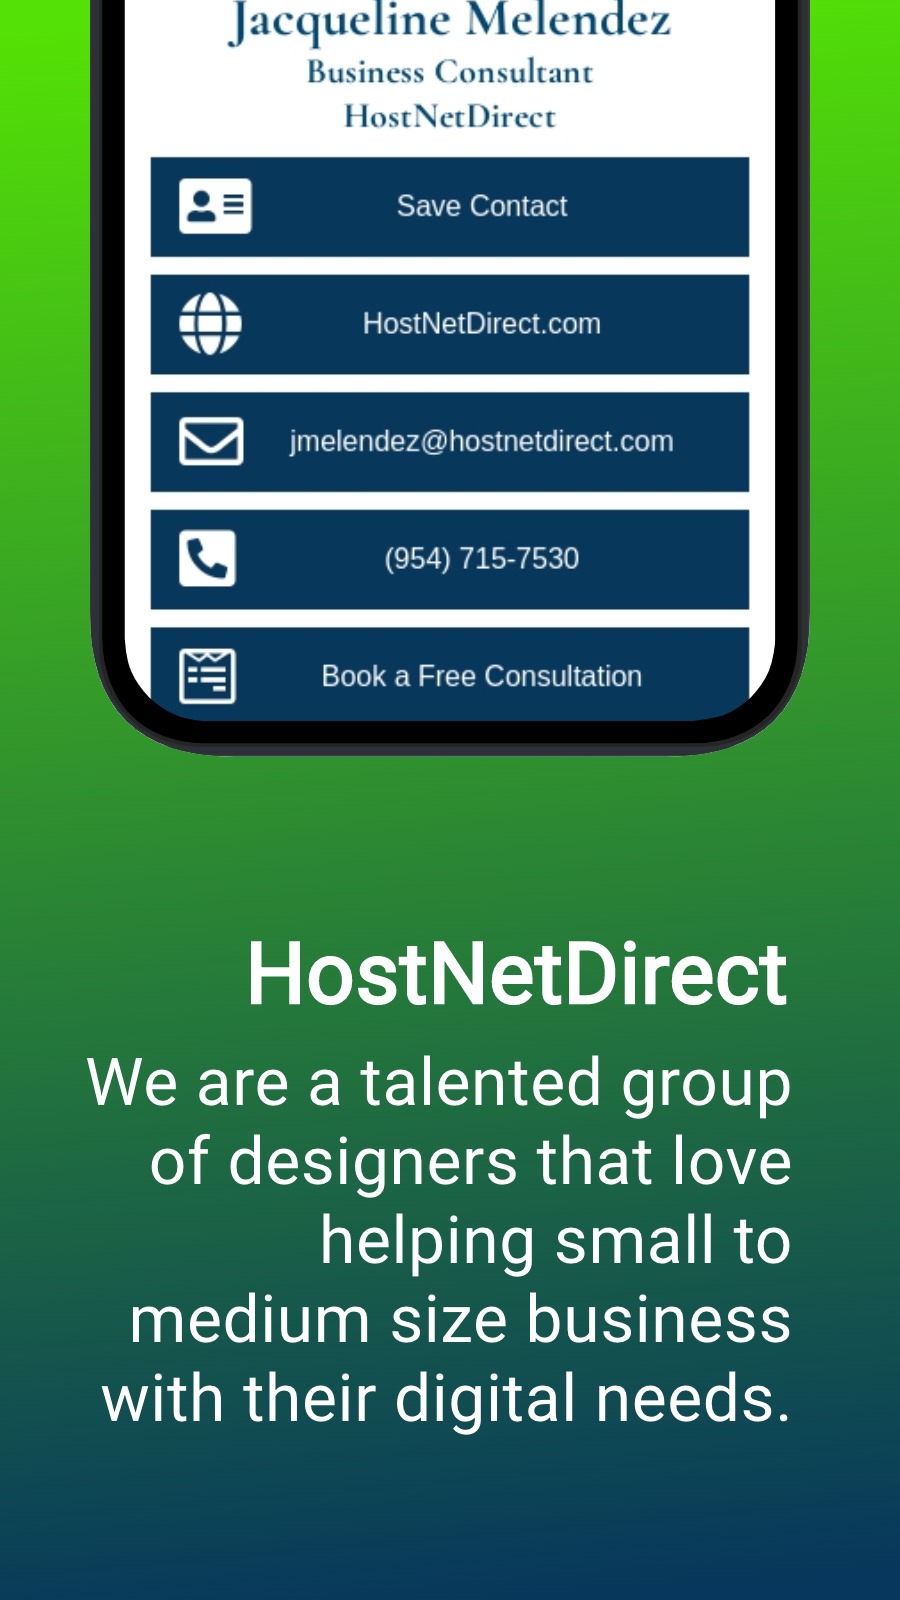 HostNetDirect - We are a talented group of designers that love helping small to medium size business with their digital needs.